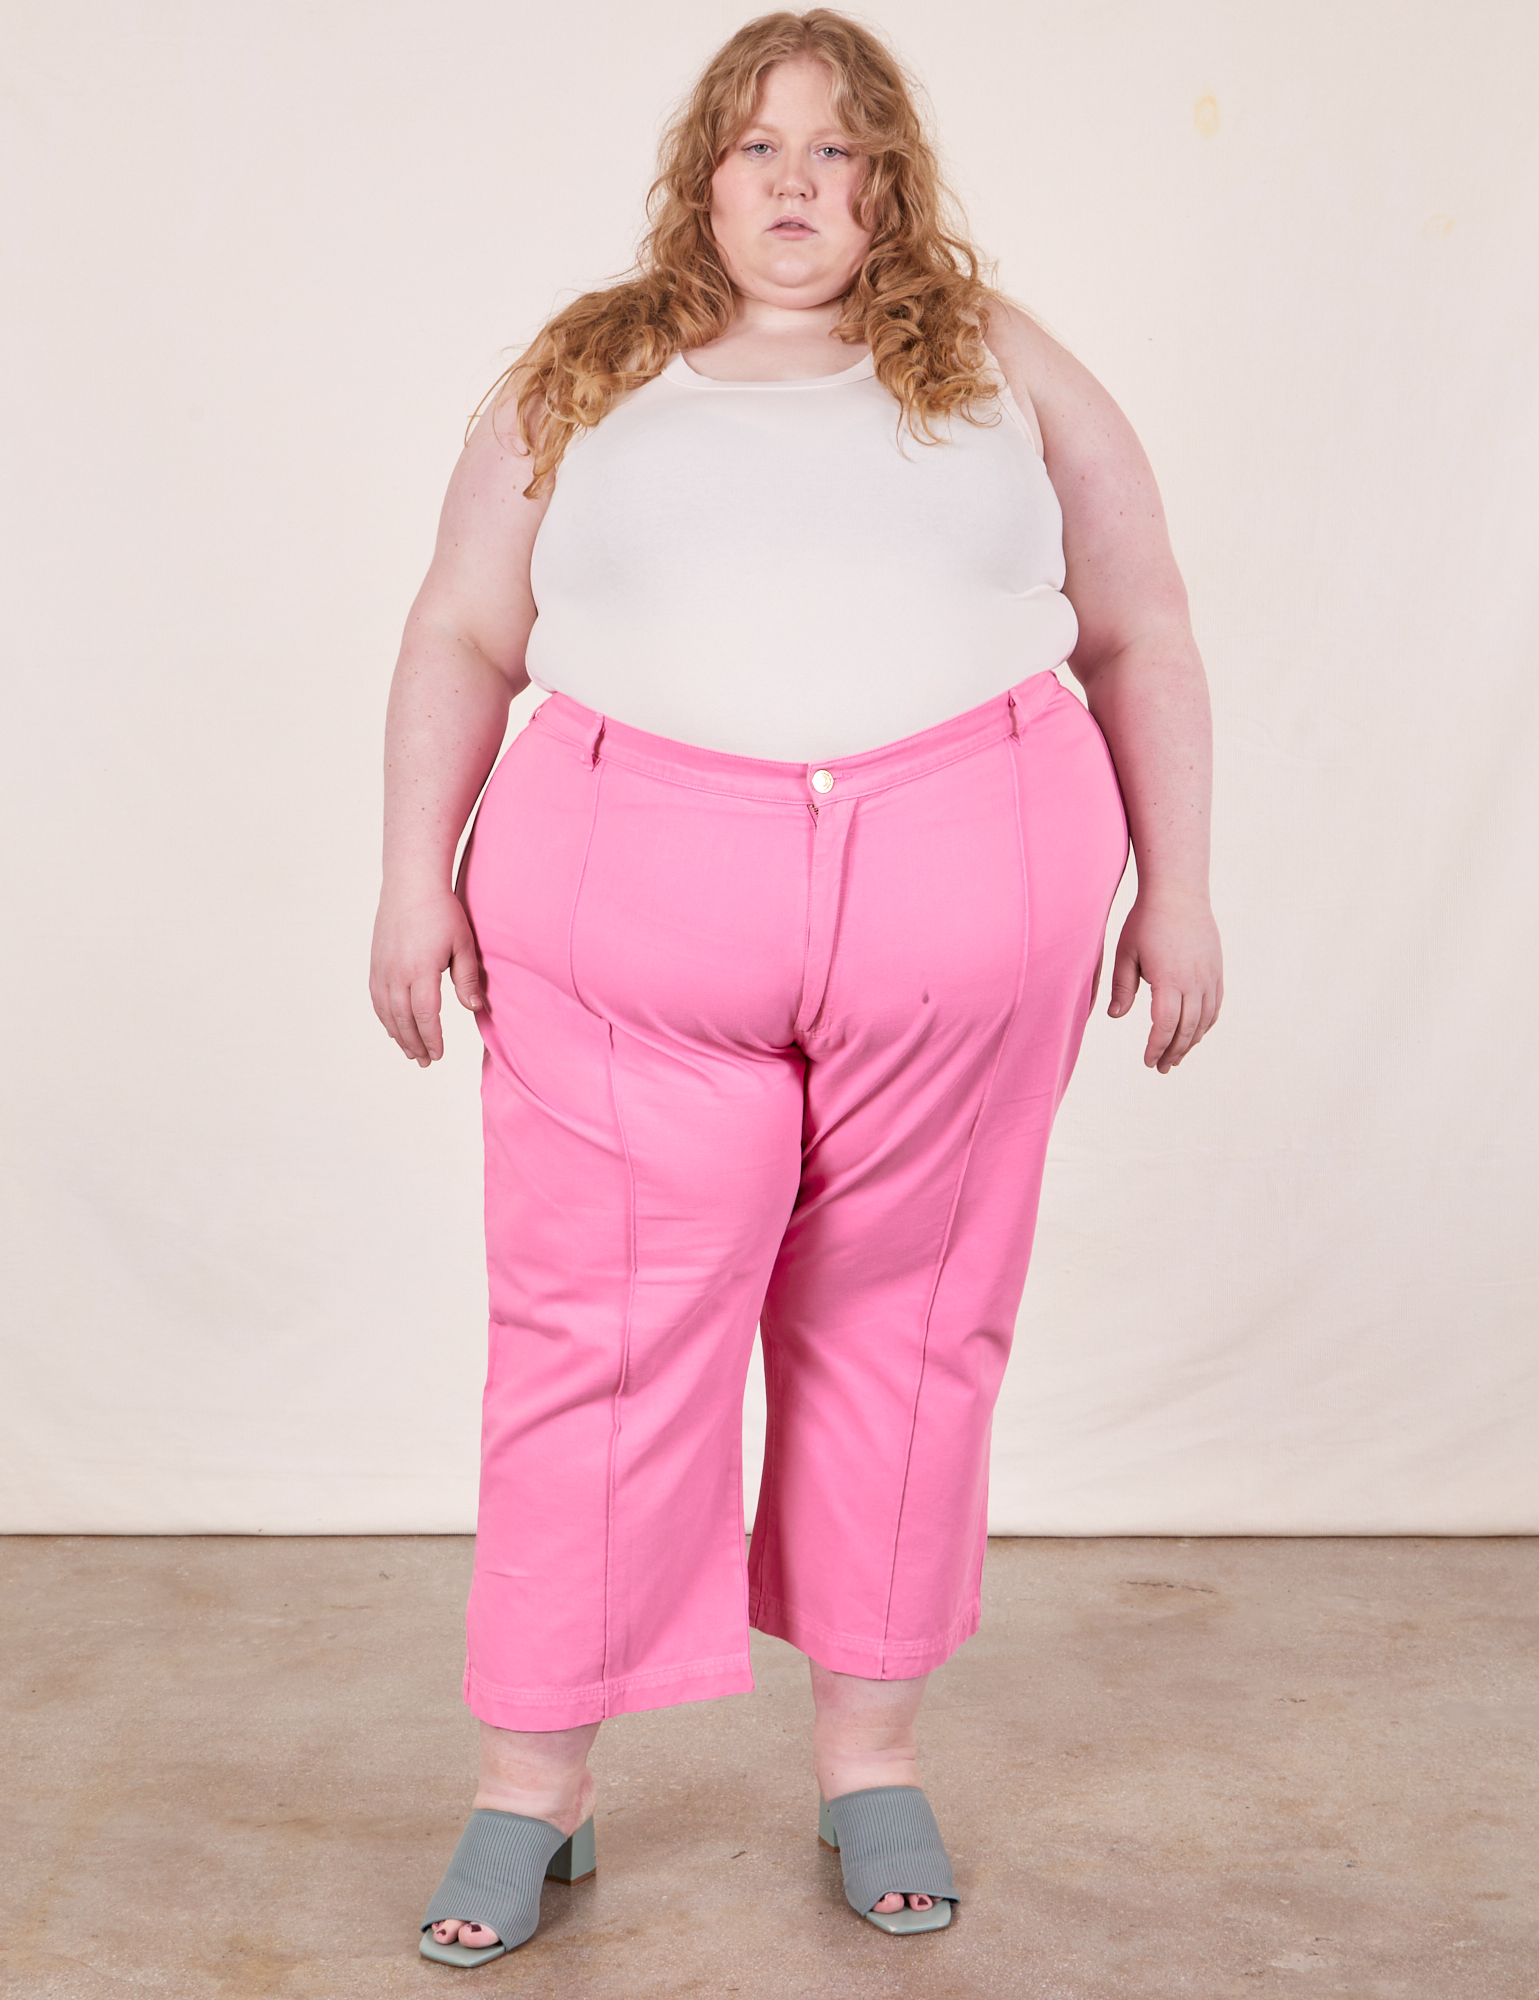 Catie is 5&#39;11&quot; and wearing size 5XL Western Pants in Bubblegum Pink paired with Tank Top in vintage tee off-white